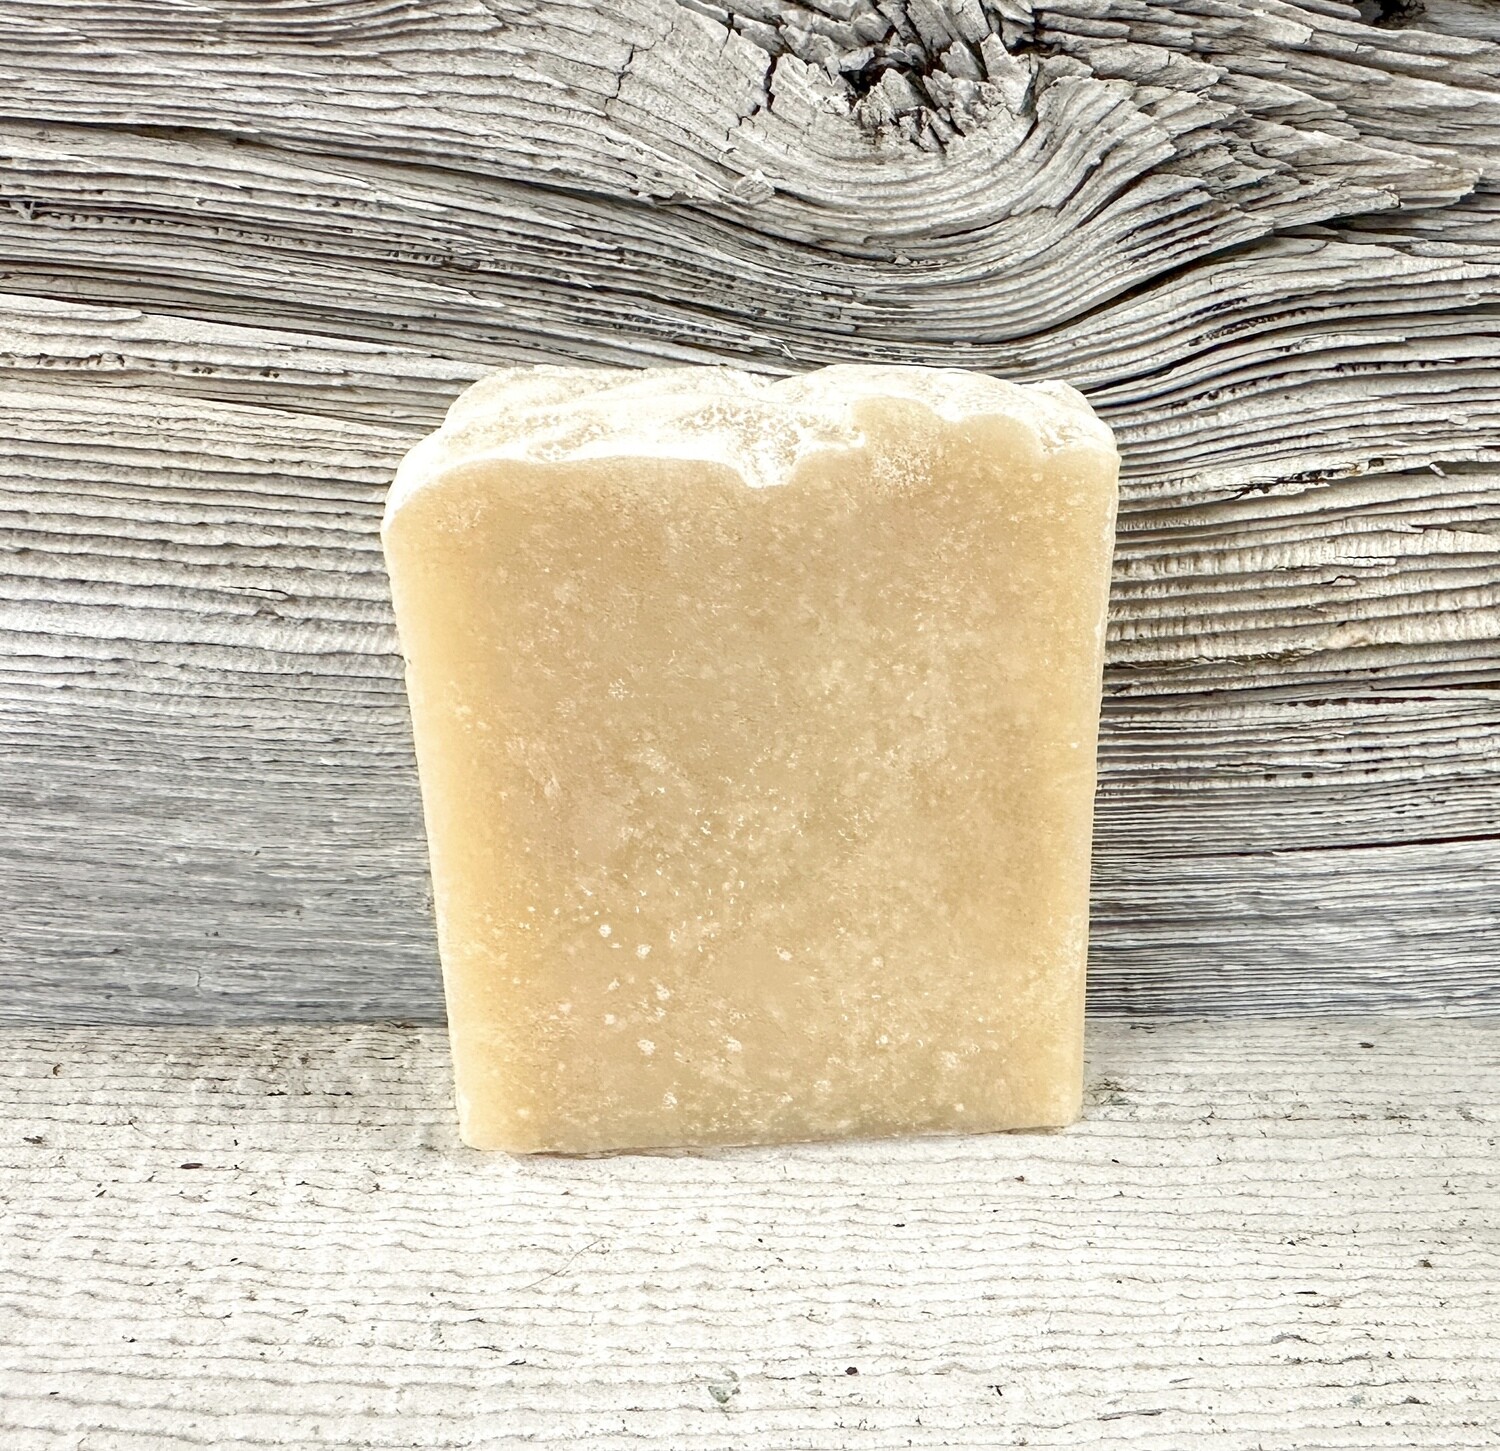 Coconut Craze Handcrafted Soap